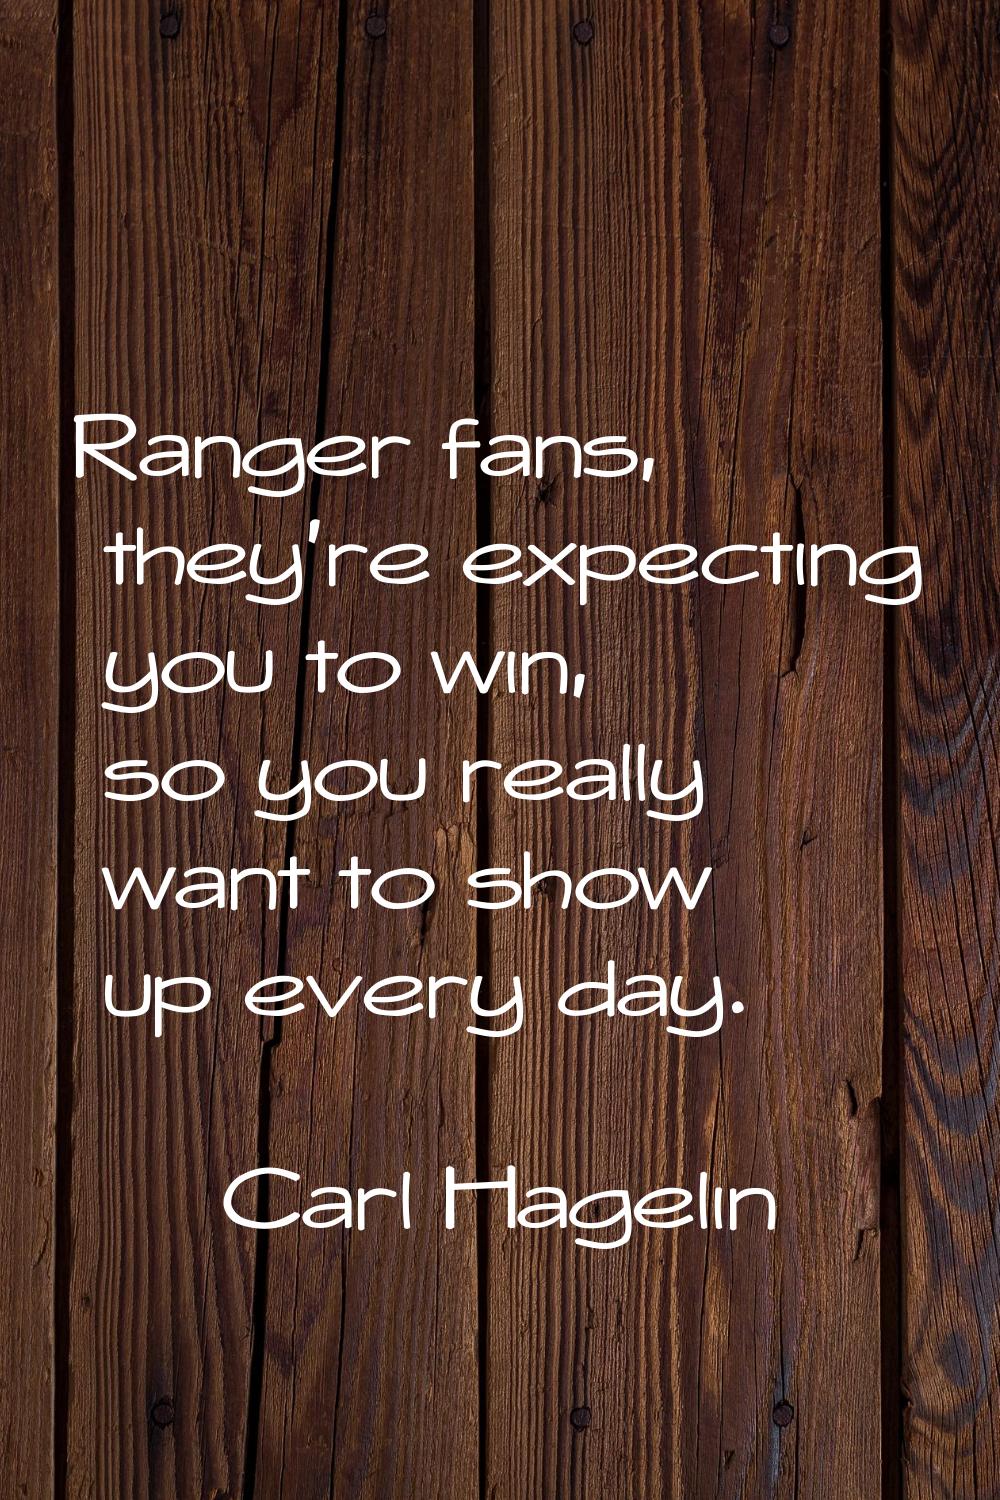 Ranger fans, they're expecting you to win, so you really want to show up every day.